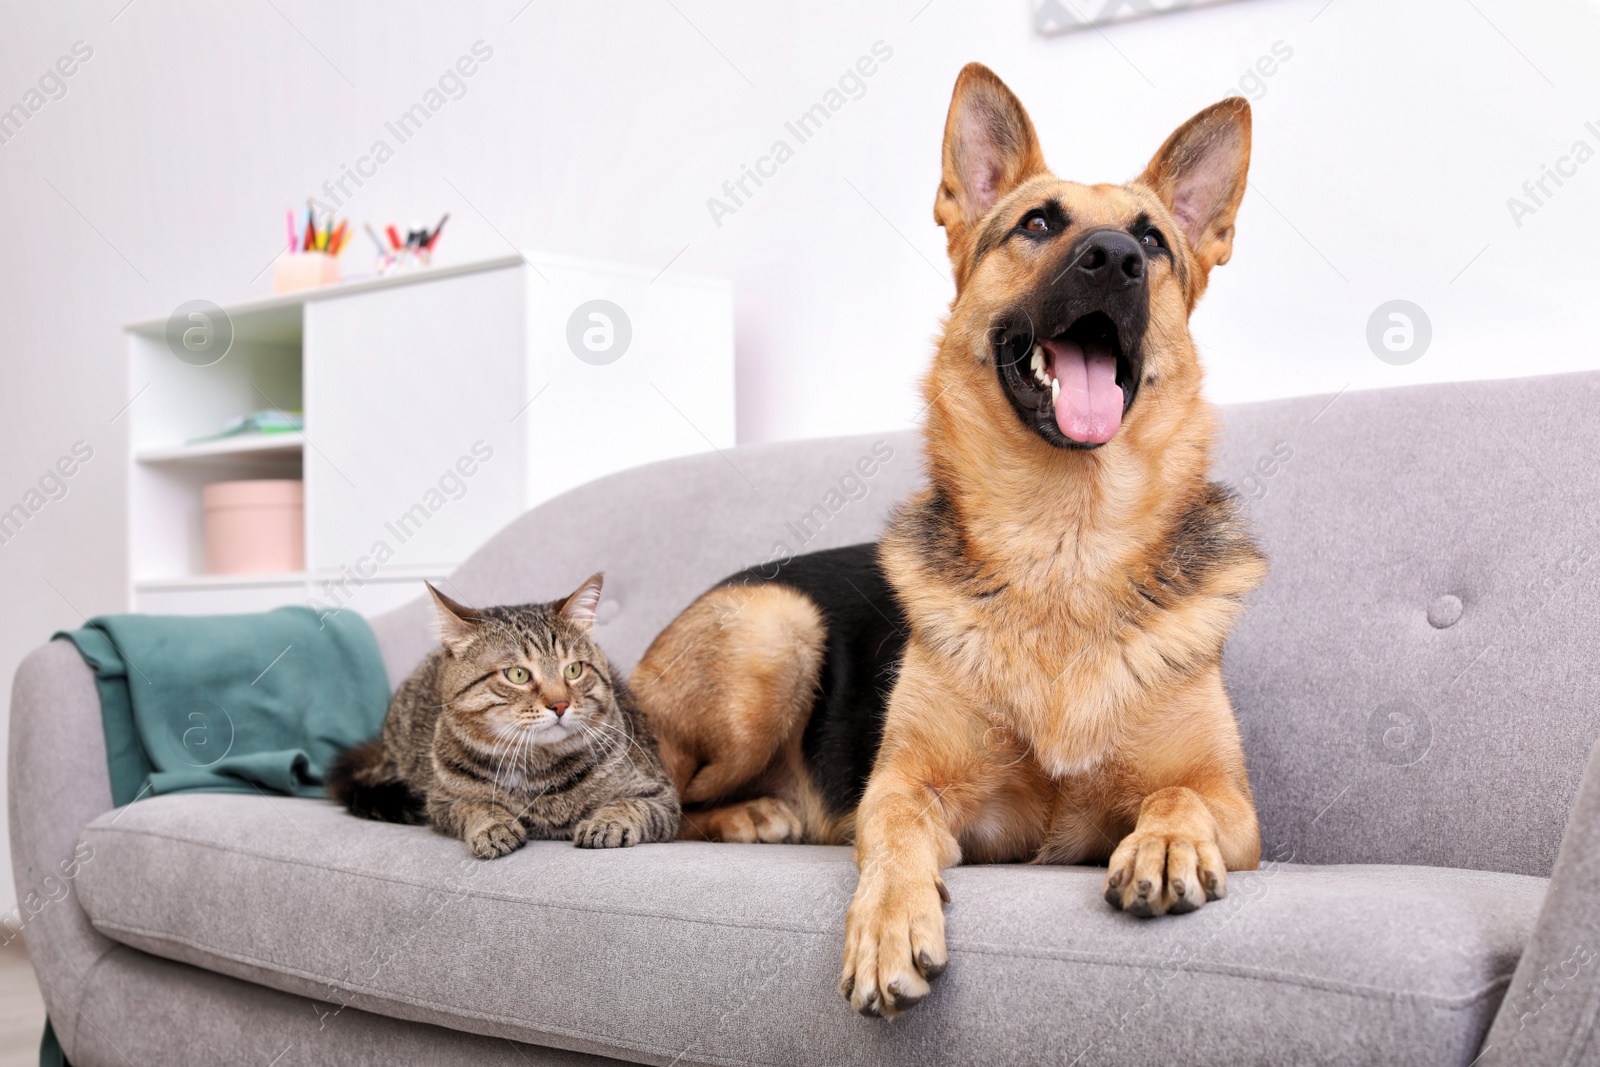 Photo of Adorable cat and dog resting together on sofa indoors. Animal friendship